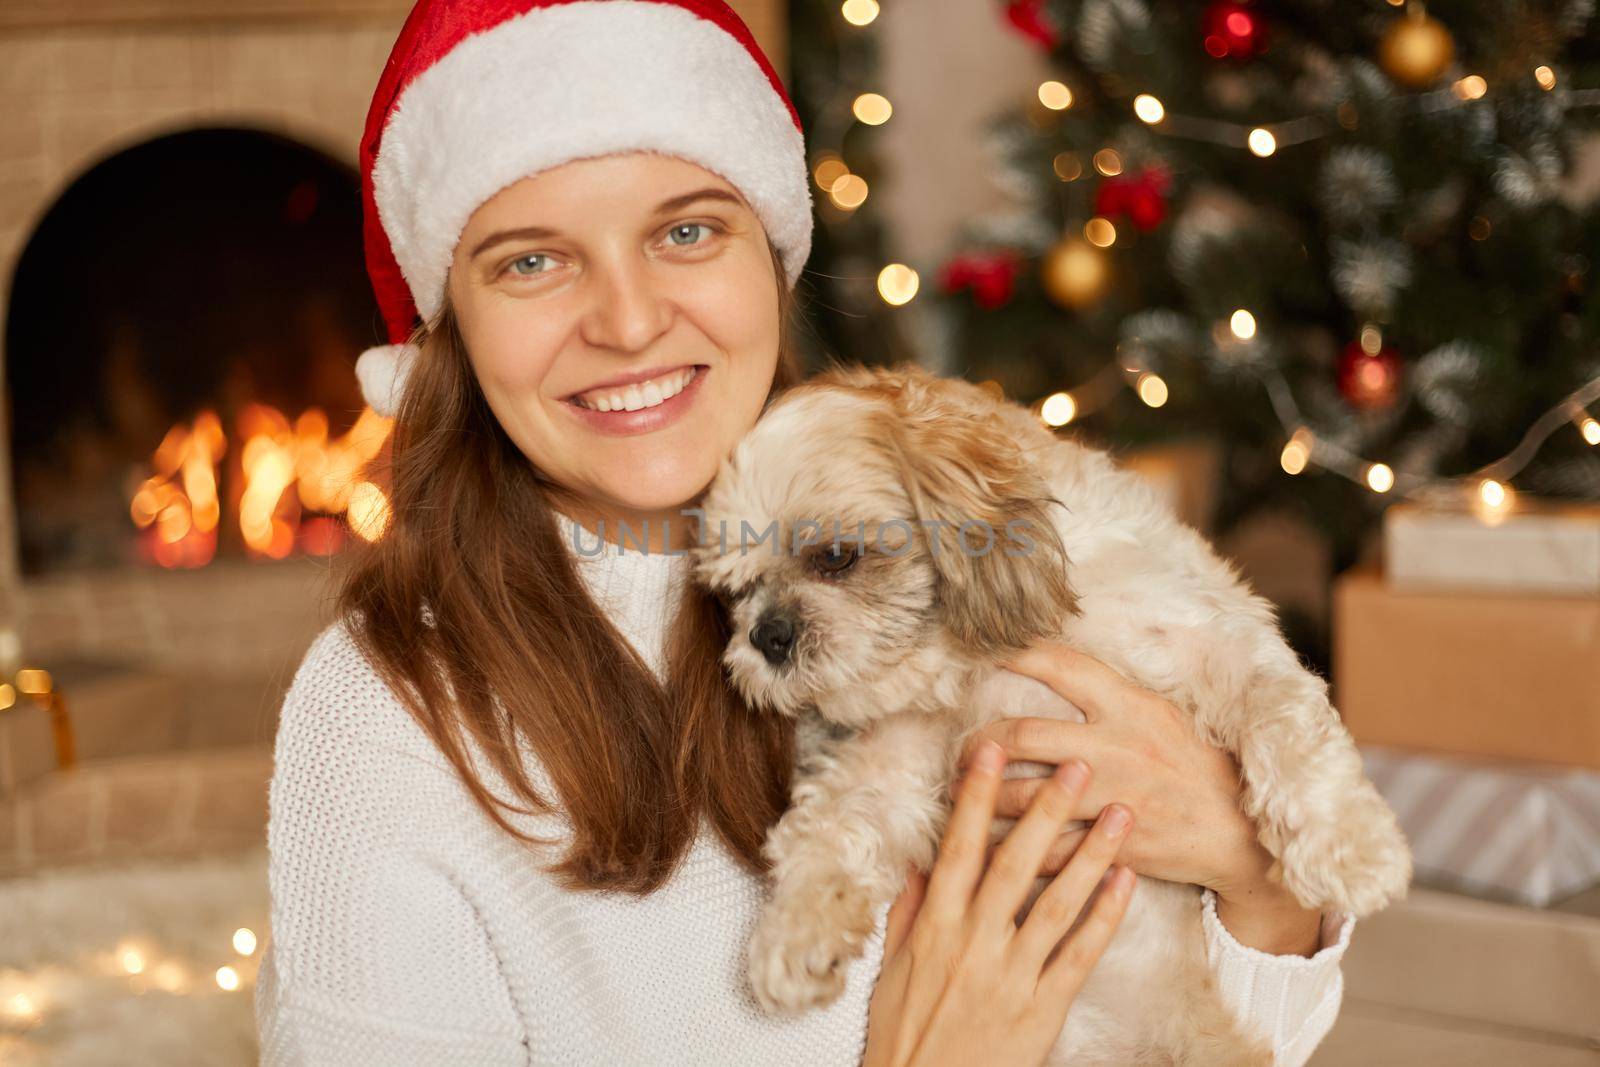 Holidays with lovely pet, woman with Pekingese dog, celebrate Christmas time or New Year at home, looks smiling directly at camera, posing indoor near x-mas tree and fireplace.